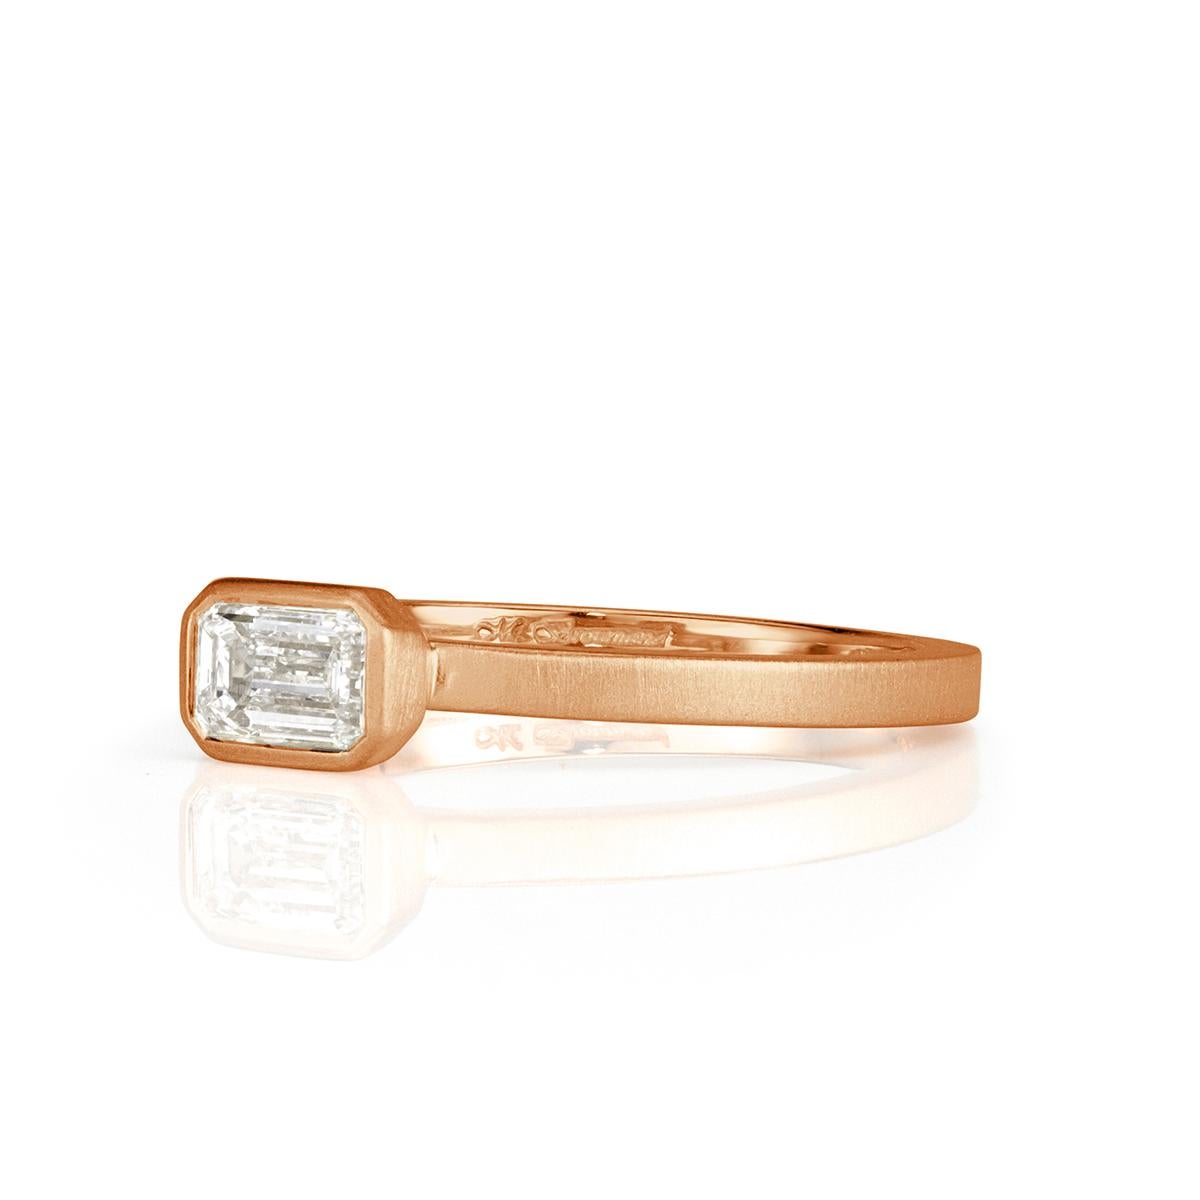 This chic diamond band showcases a beautiful 0.45ct emerald cut center diamond graded at F in color, VS1 in clarity. It is bezel set in a satin finish, 18k rose gold setting style. Absolutely perfect for everyday wear!
